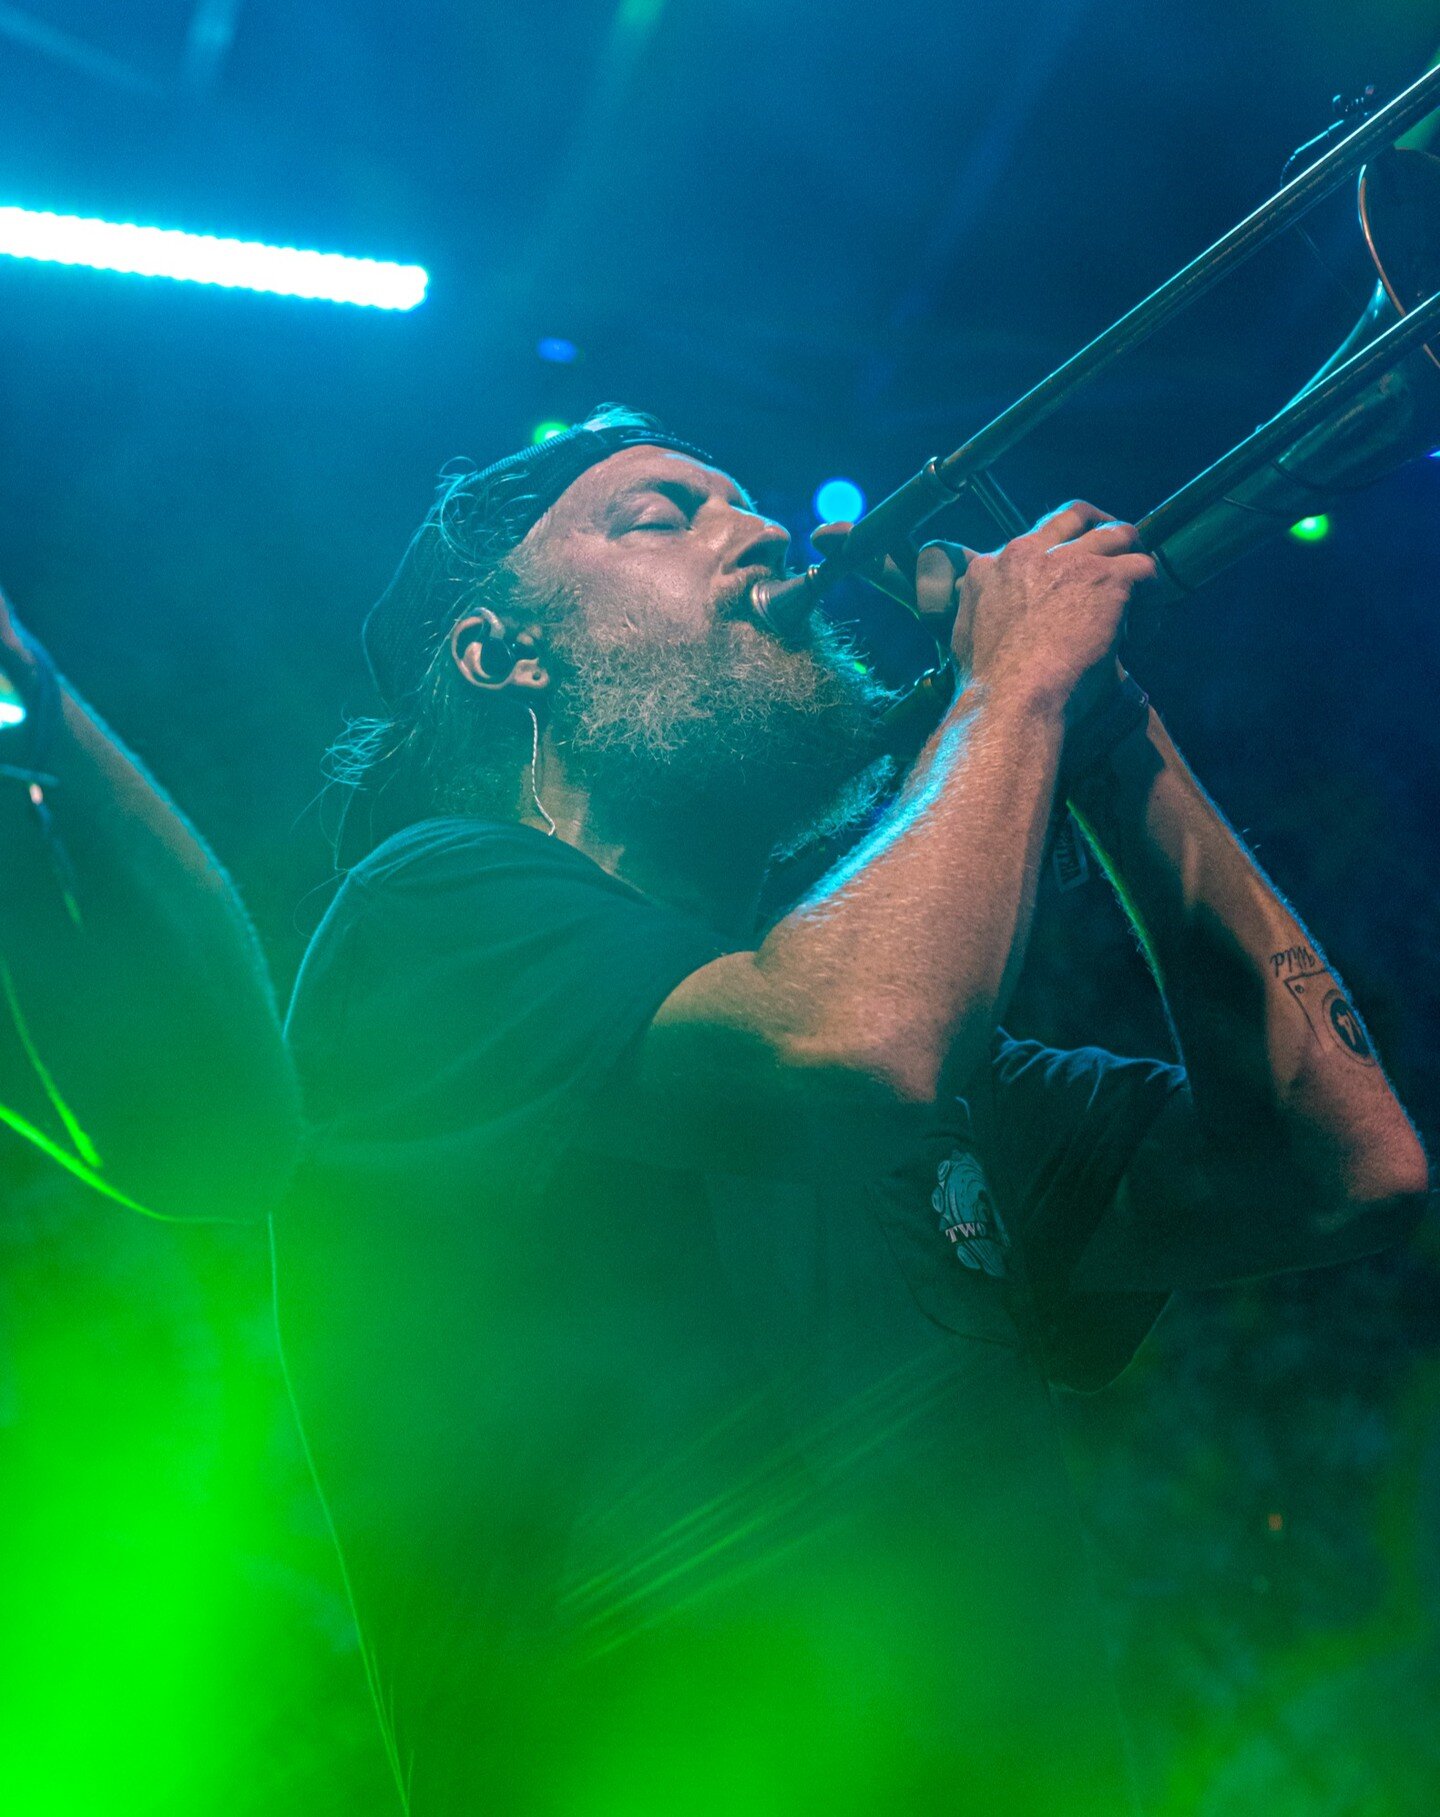 @pepperlive had some of the best lights at @everwildfestival!